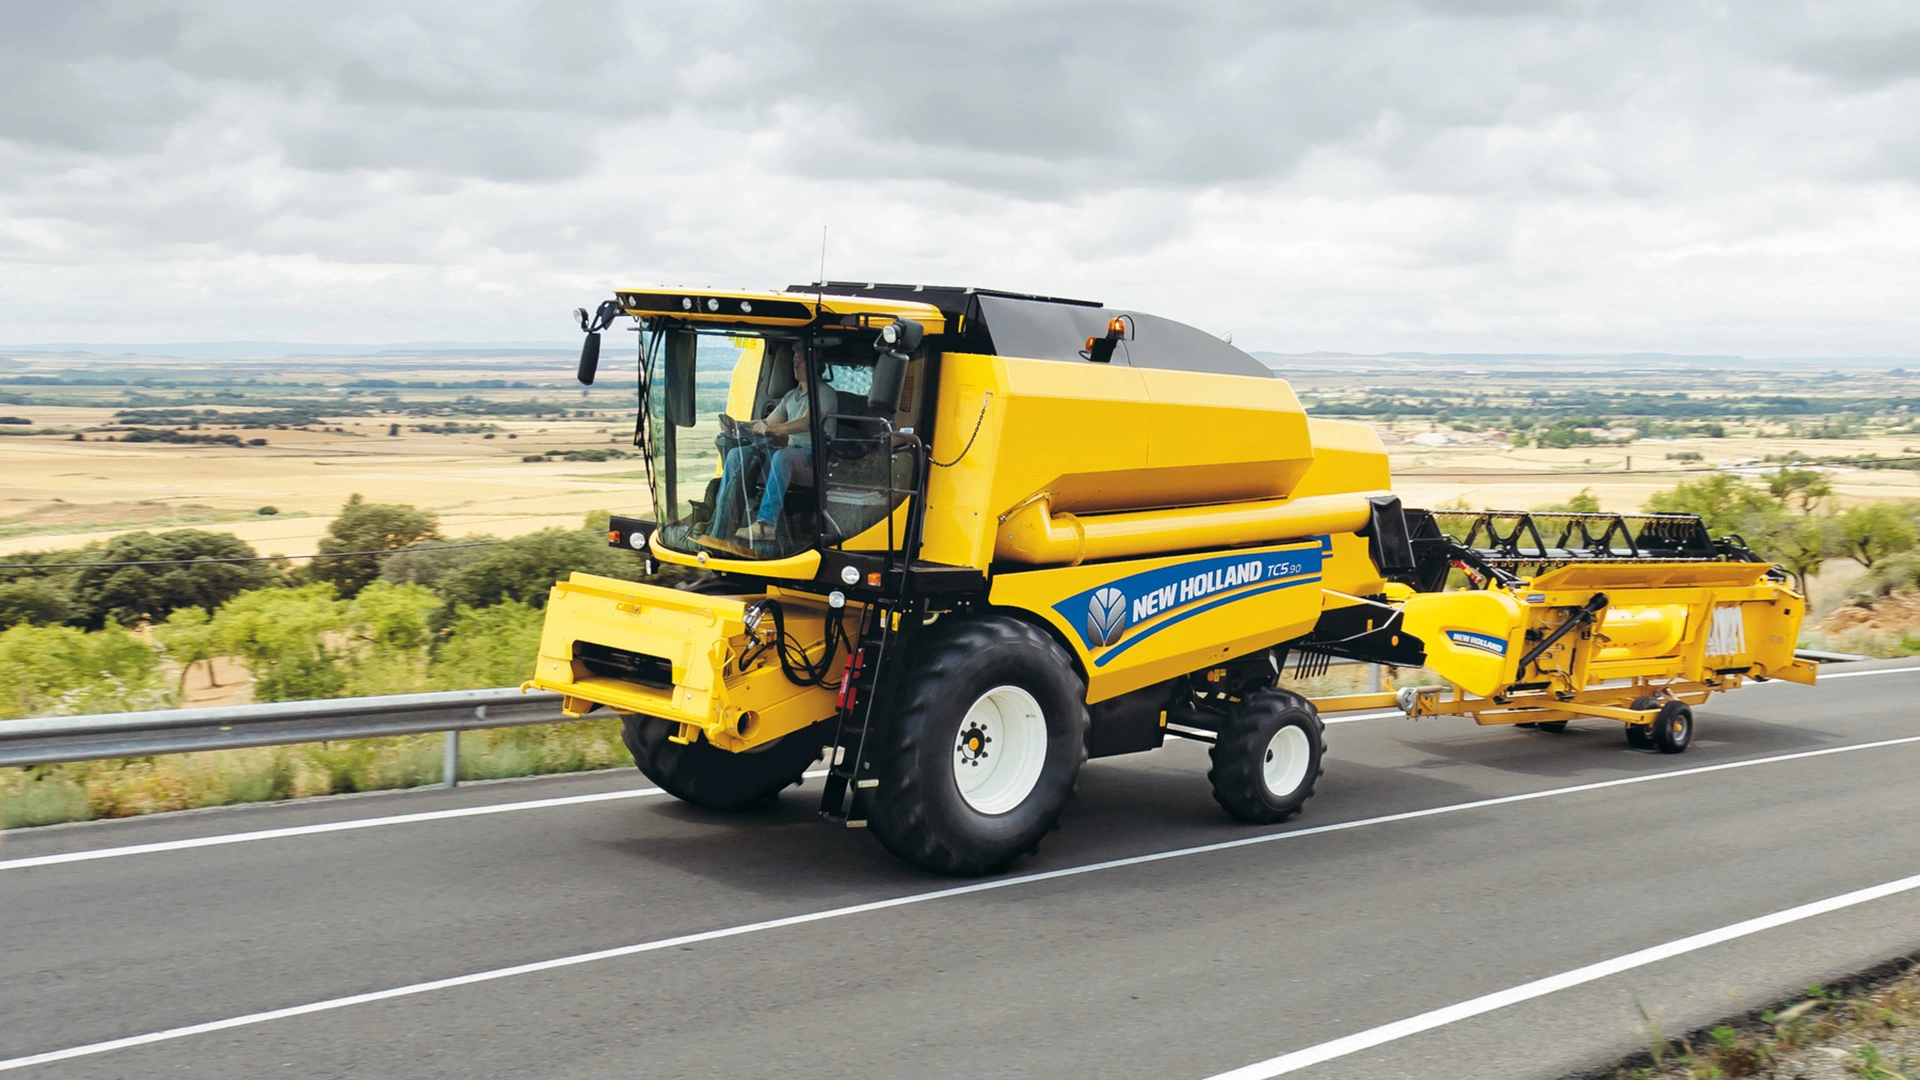 New Holland's TC Combine Harvester on the road